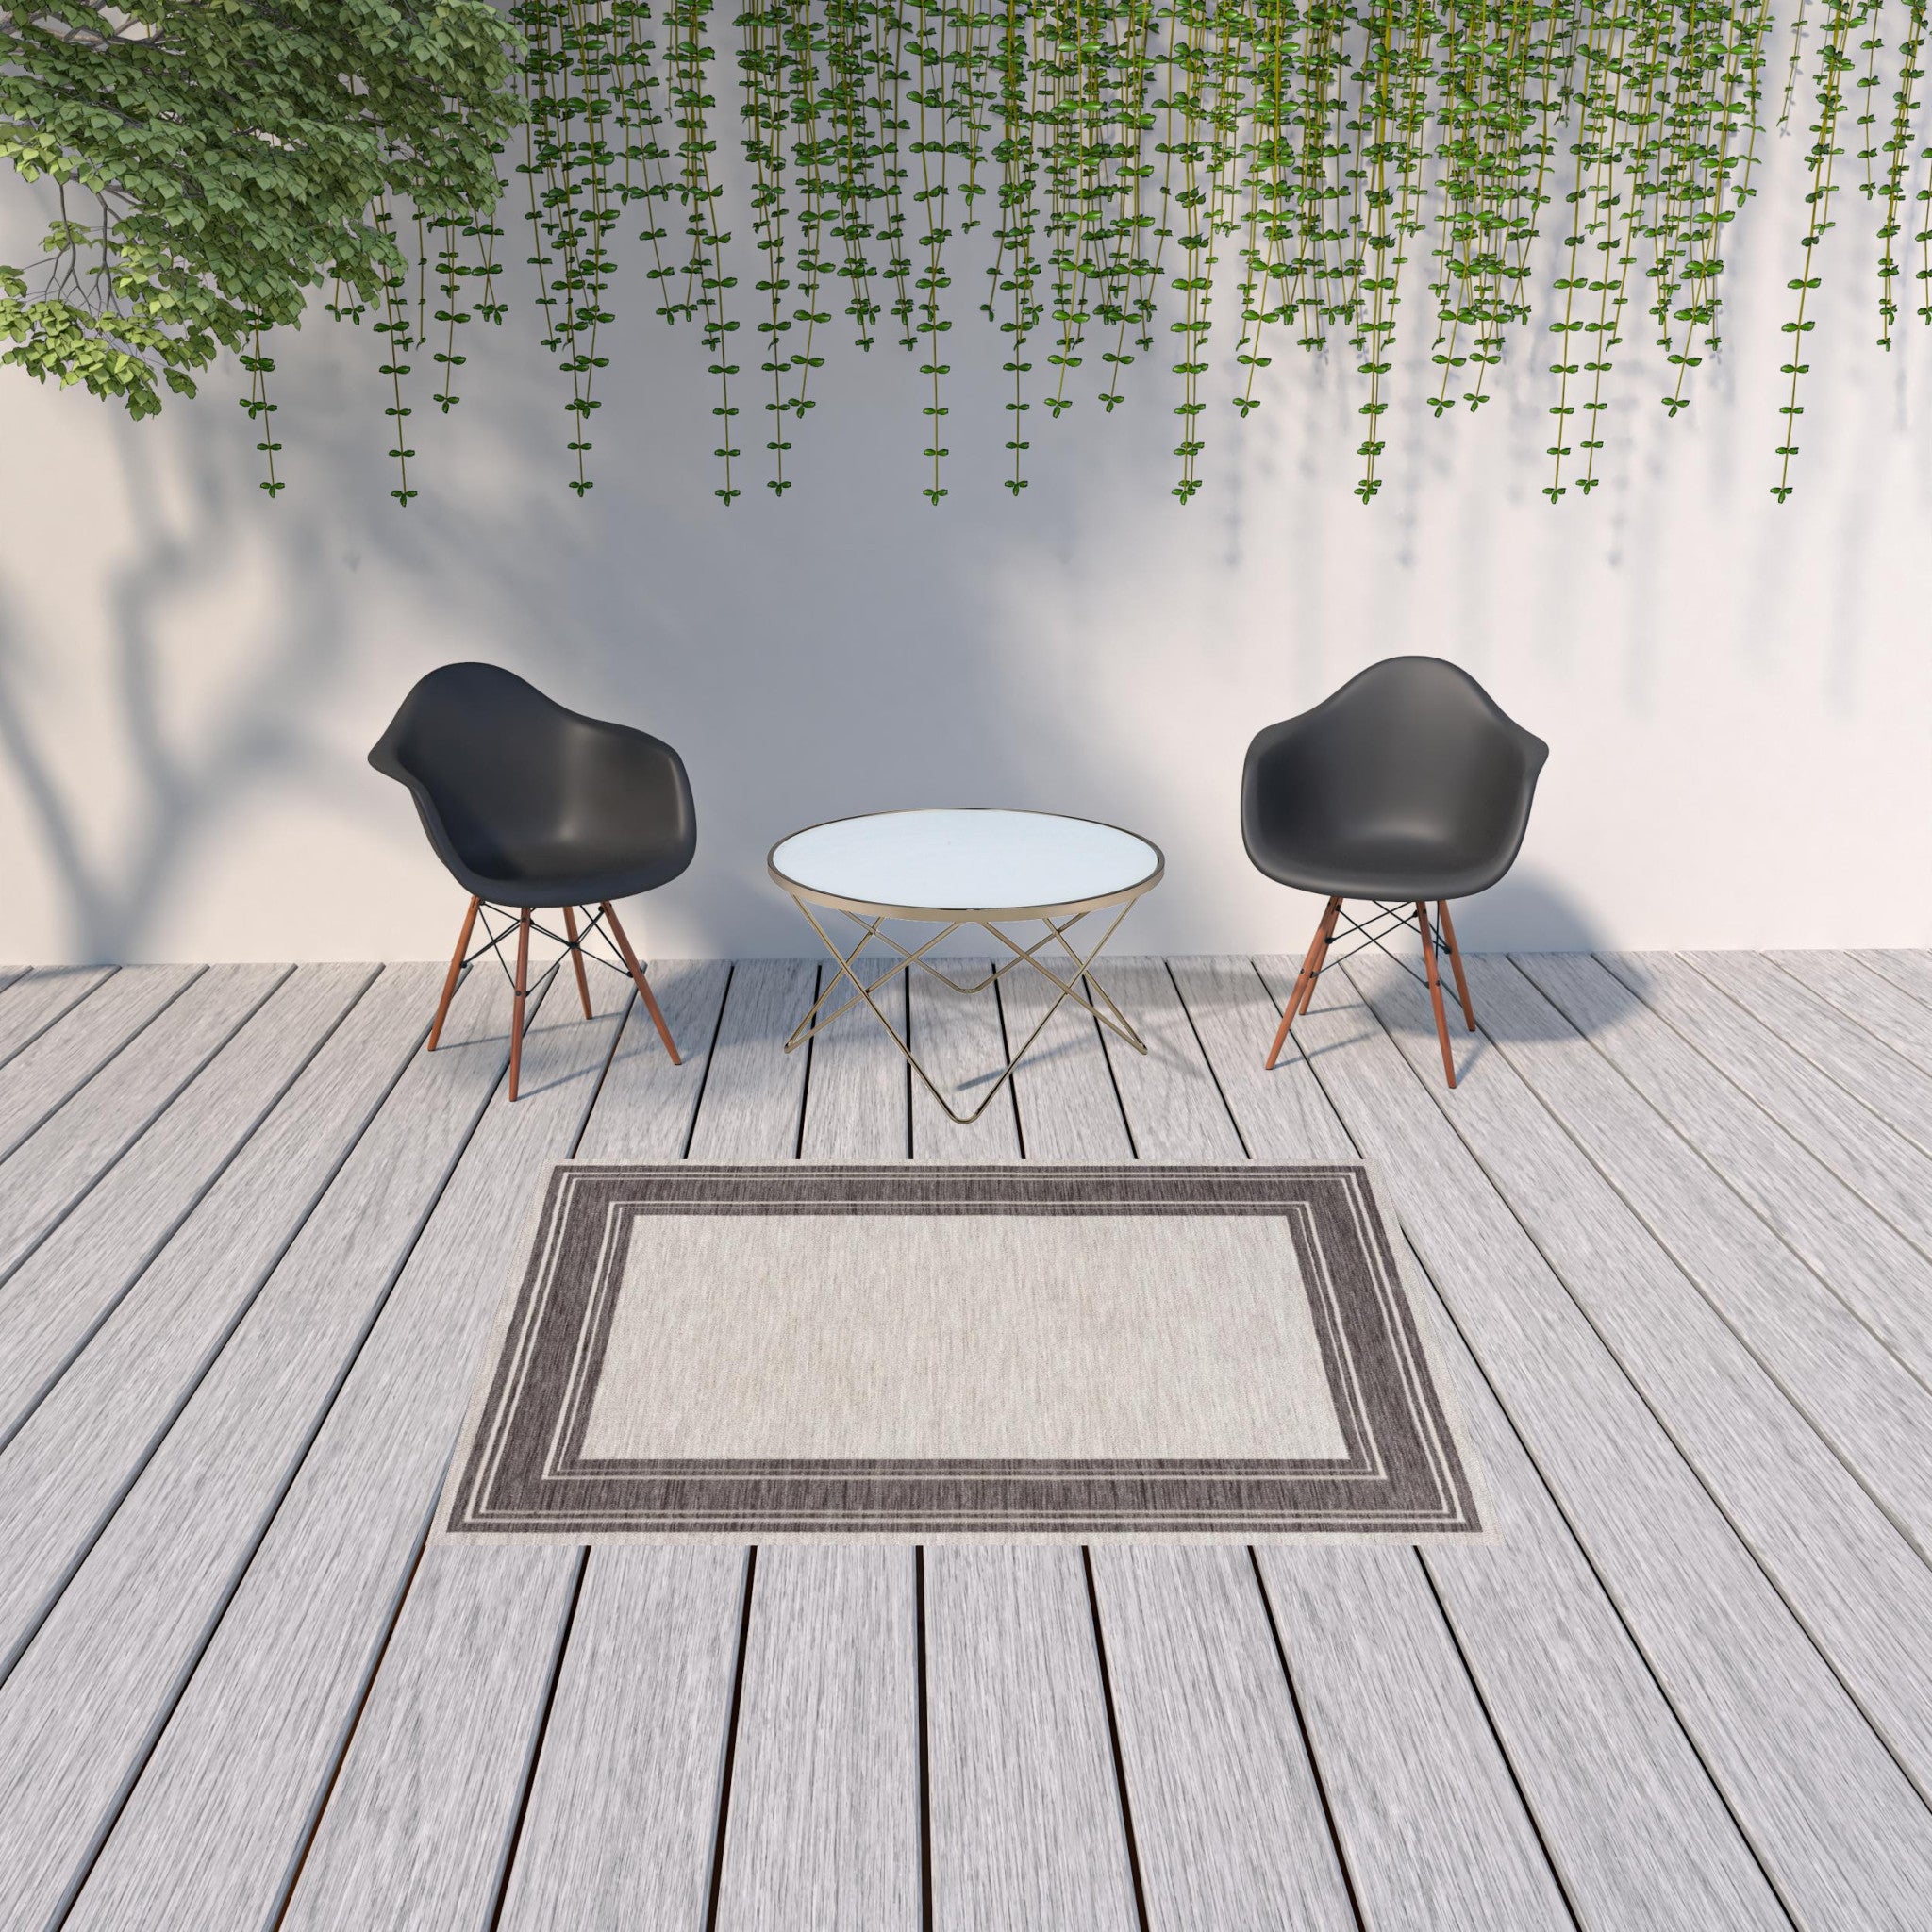 5' X 7' Gray And Ivory Indoor Outdoor Area Rug